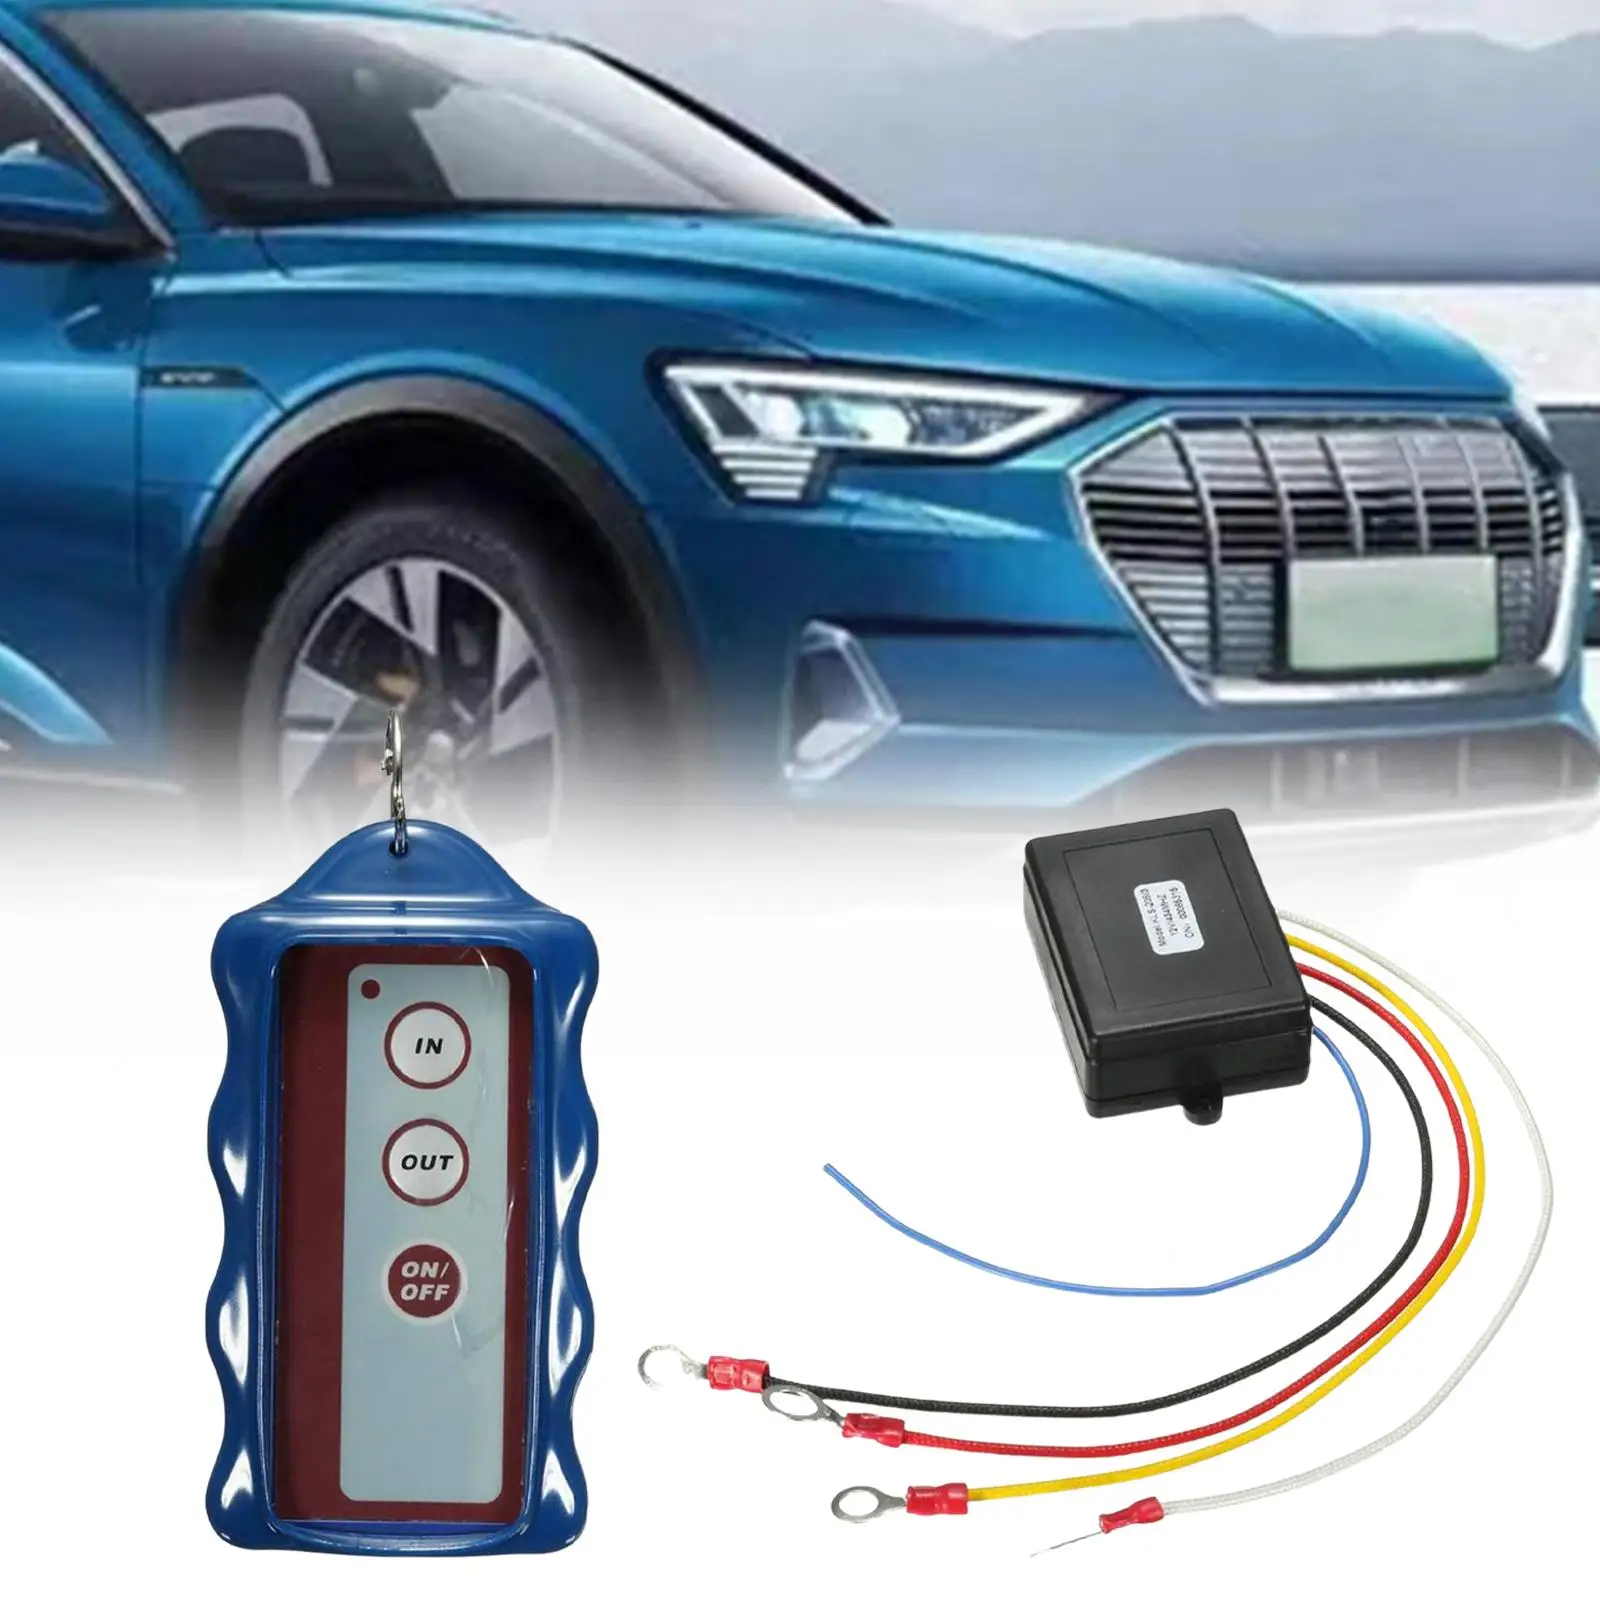 Wireless Winch Remote Control 98 Feet Control Distance Five Wires Accessories Universal Winch Switch for Vehicle Trailer